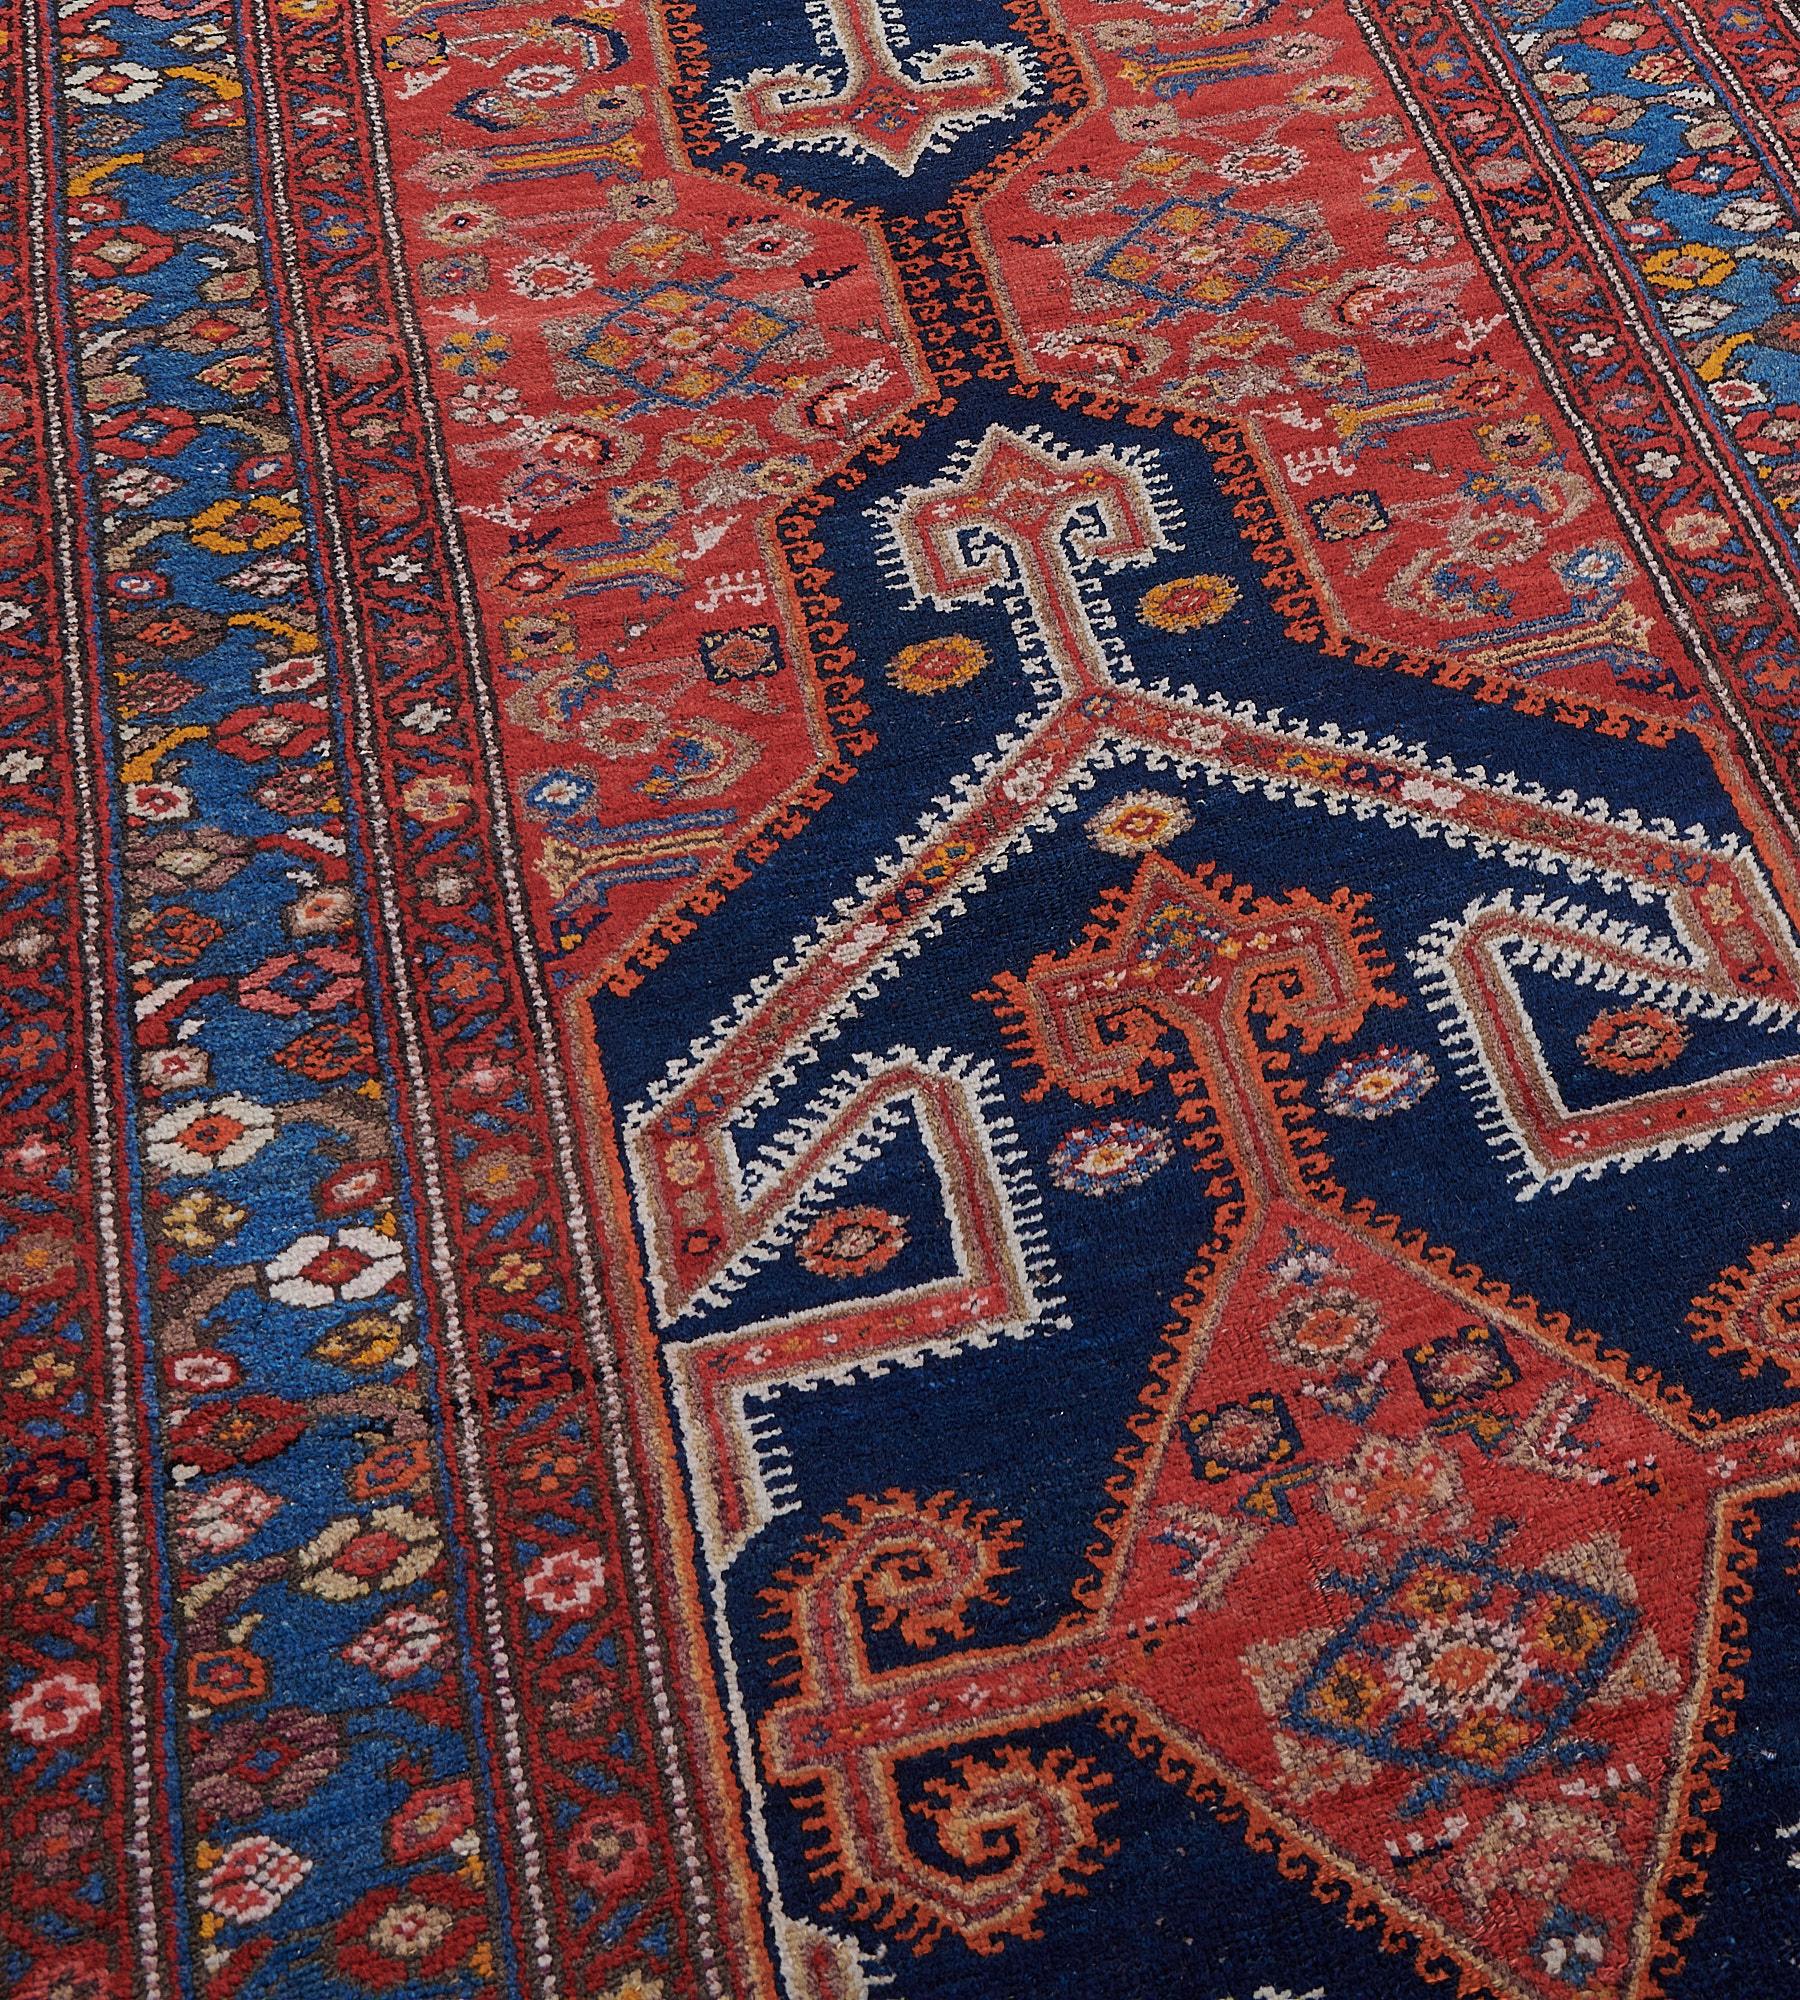 This circa 1910 Bidjar Runner has a tomato-red field with a polychrome herati-pattern around a column of three indigo-blue hooked panels each containing a central brick-red lozenge medallion with hooked motifs at each end and side an outer band of